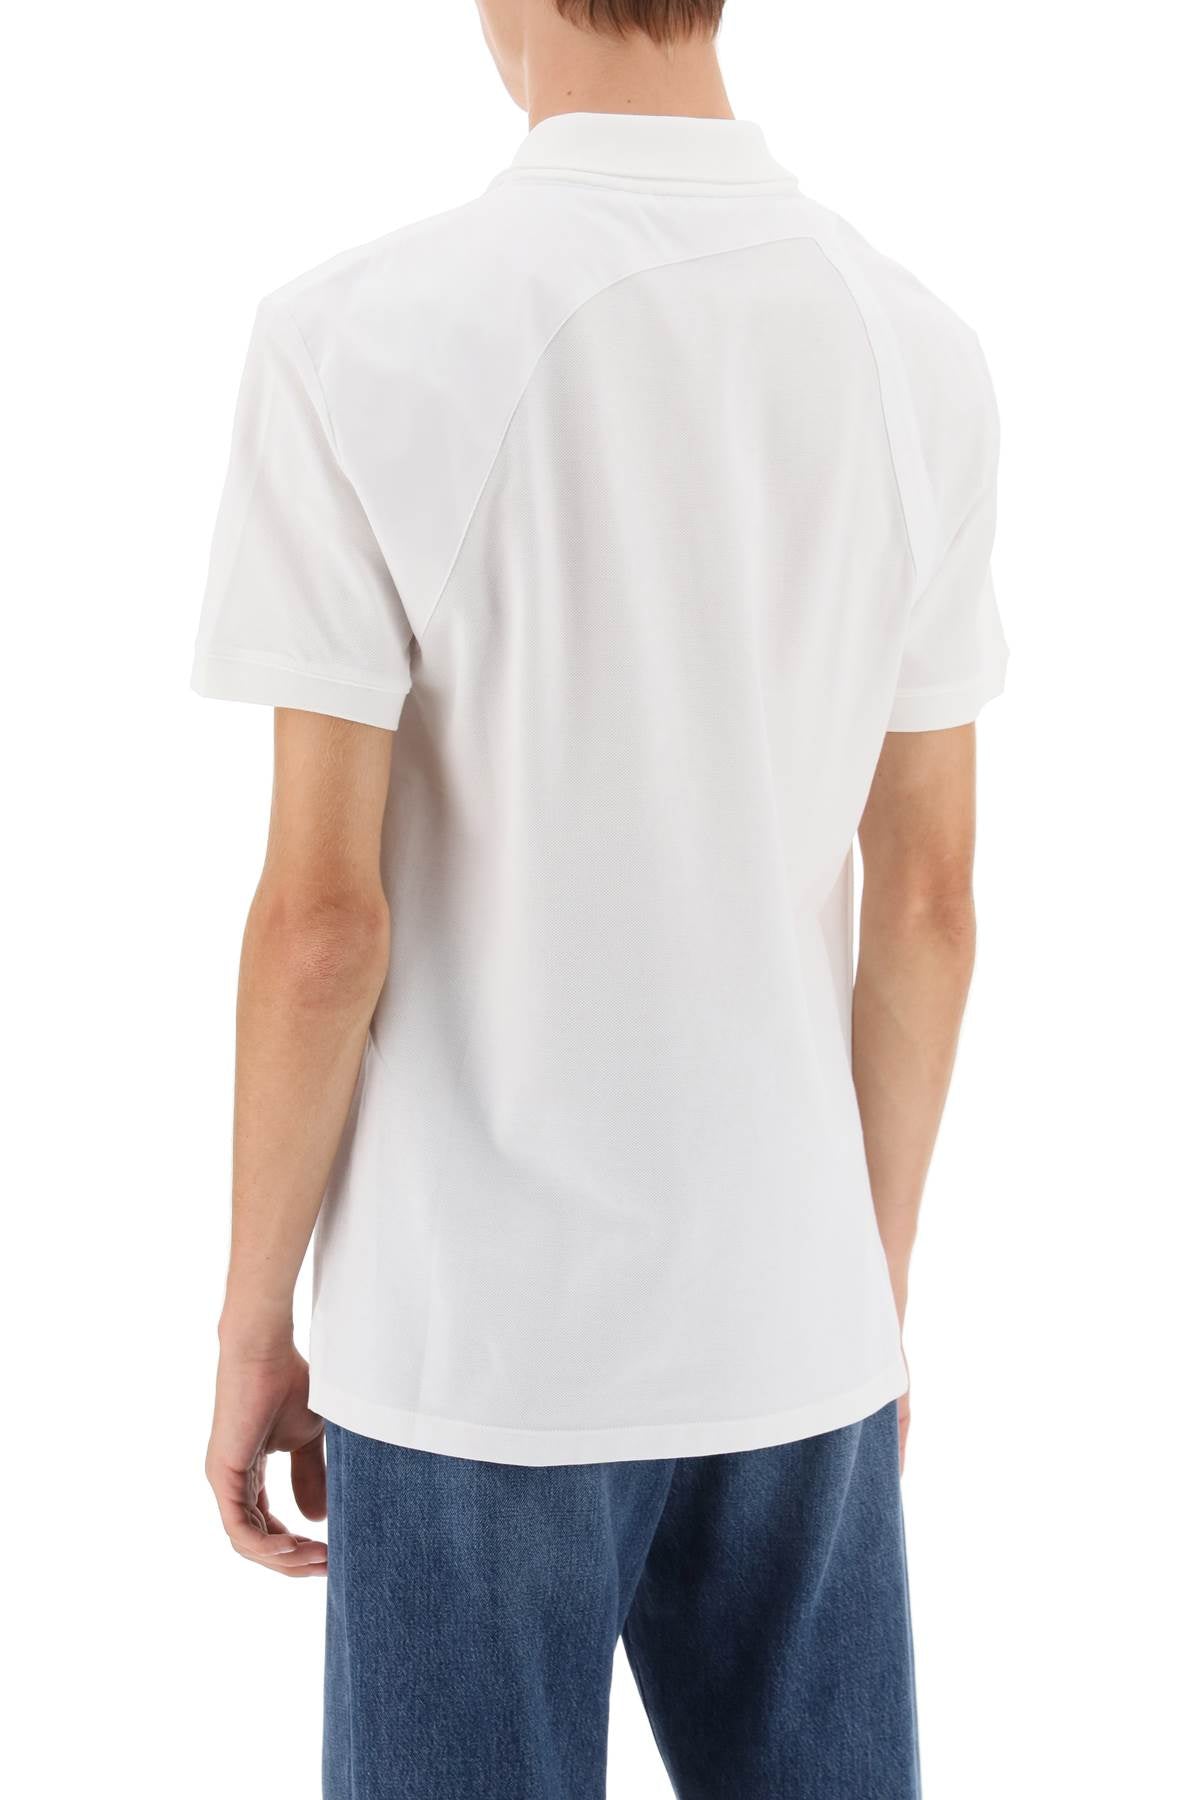 ALEXANDER MCQUEEN Men's Pique Polo Shirt with Harness Detailing in White